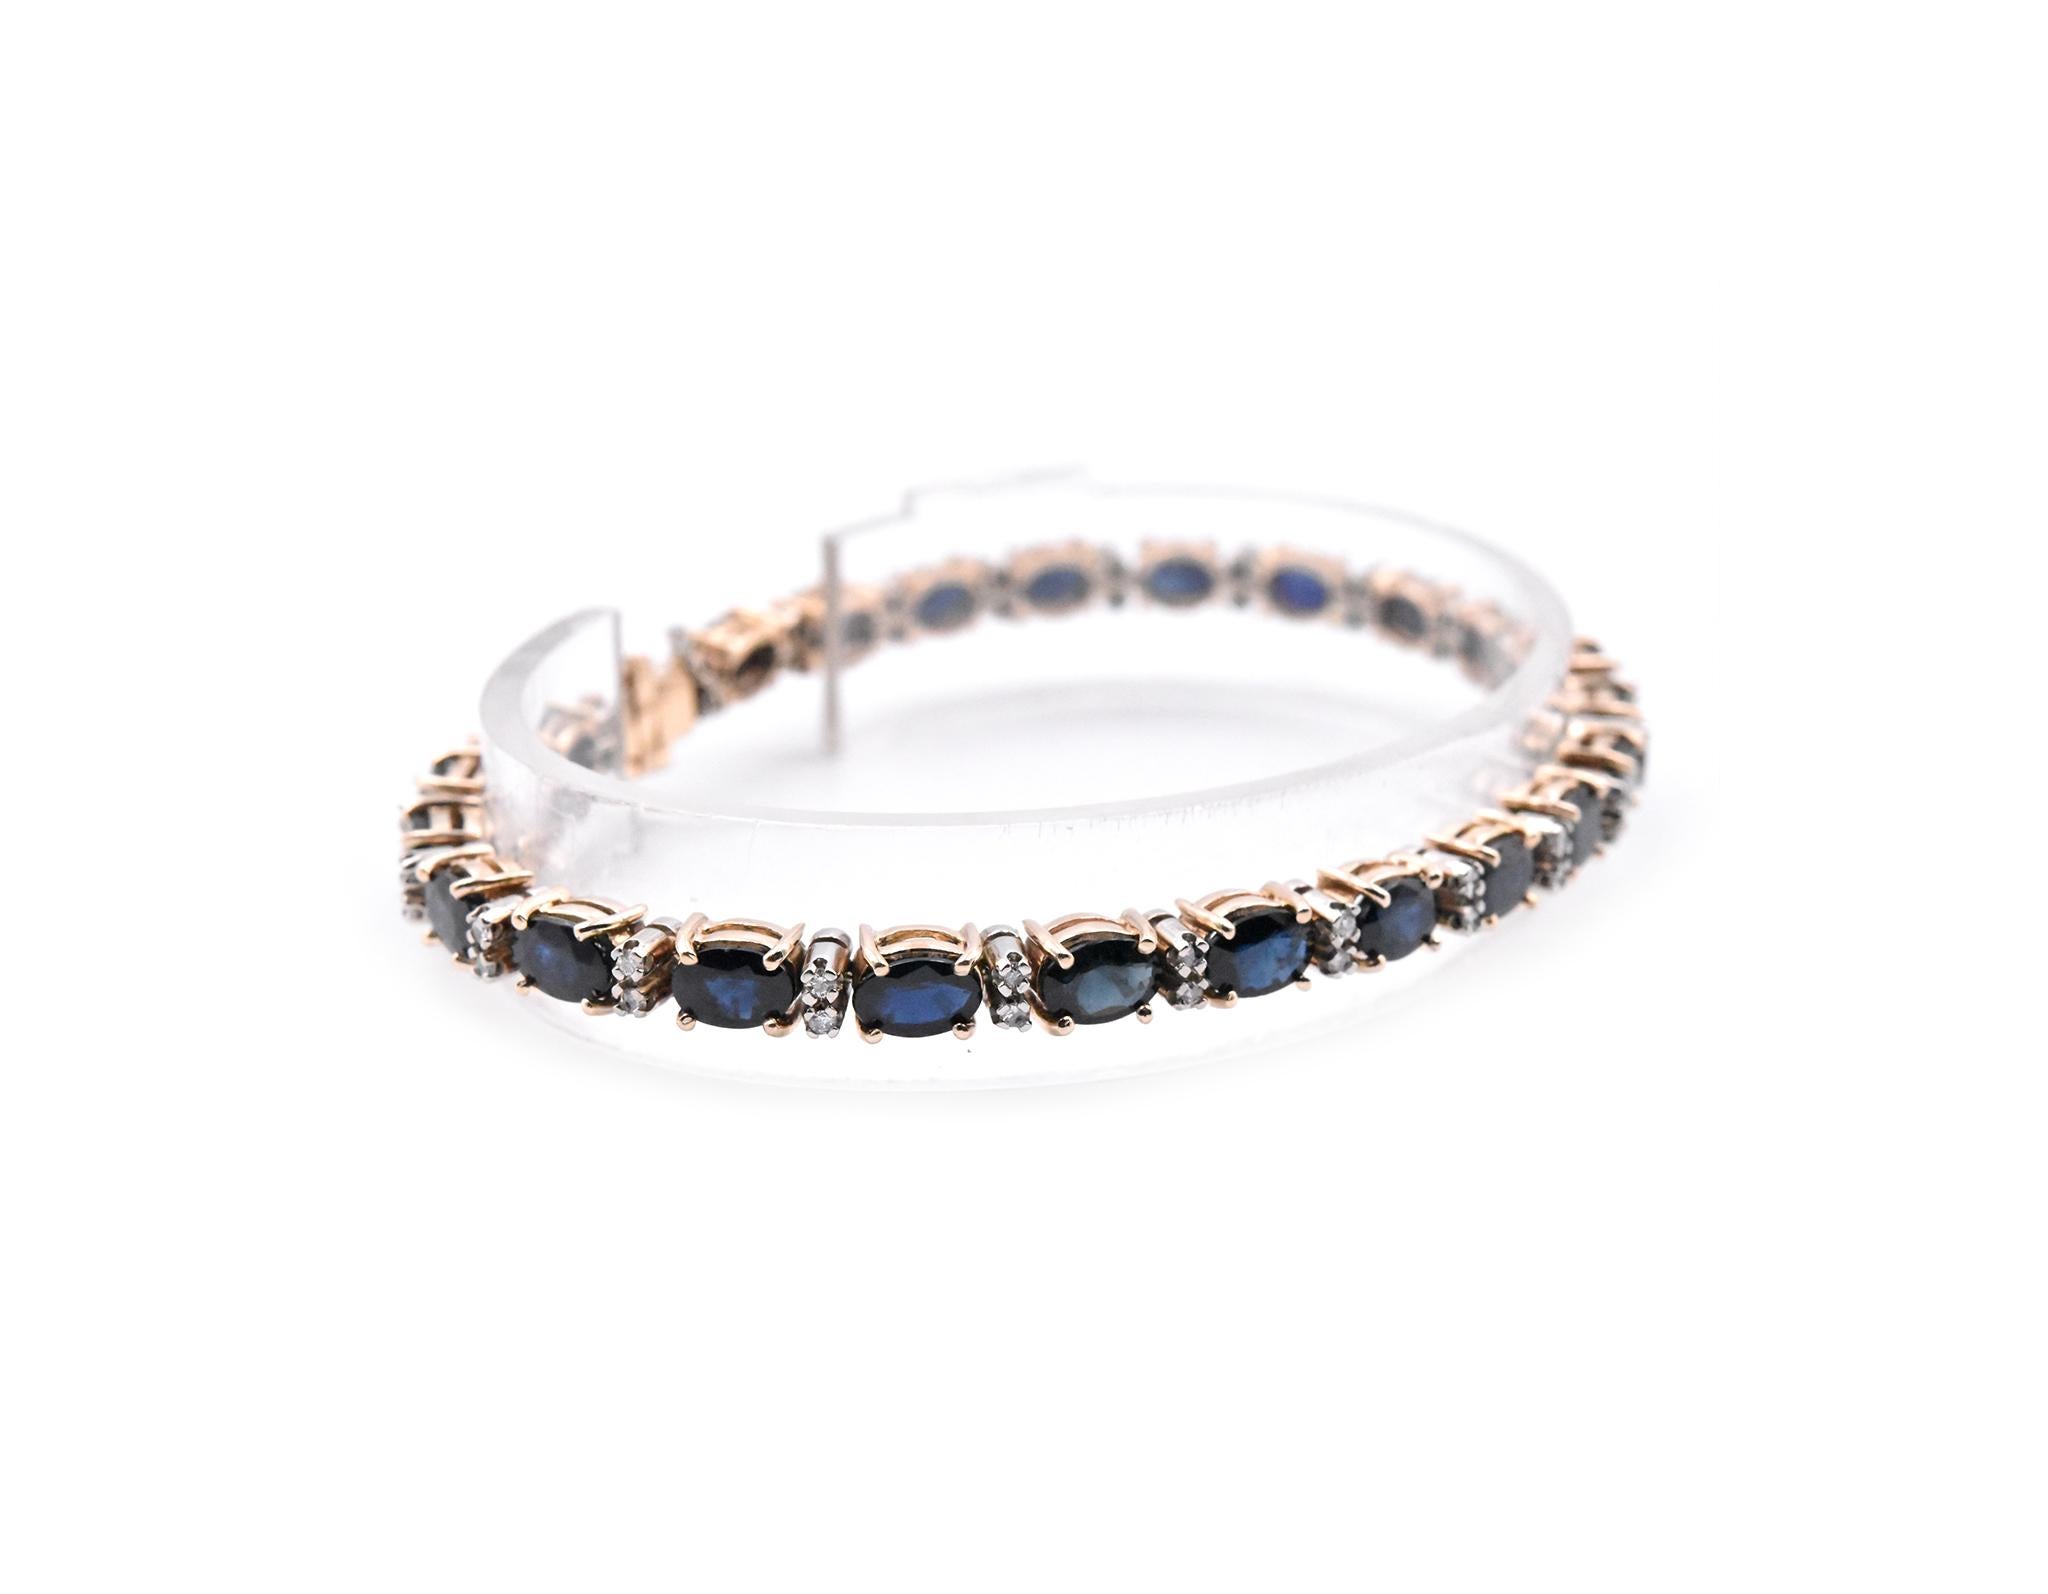 Designer: custom 
Material: 14k yellow and white gold
Sapphires: 24 oval faceted sapphires = 10.32cttw
Diamonds: 48 round brilliant cuts = 0.75cttw
Color: H
Clarity: SI1
Dimensions: bracelet will fit up to a 7.5-inch wrist and 5.10mm in